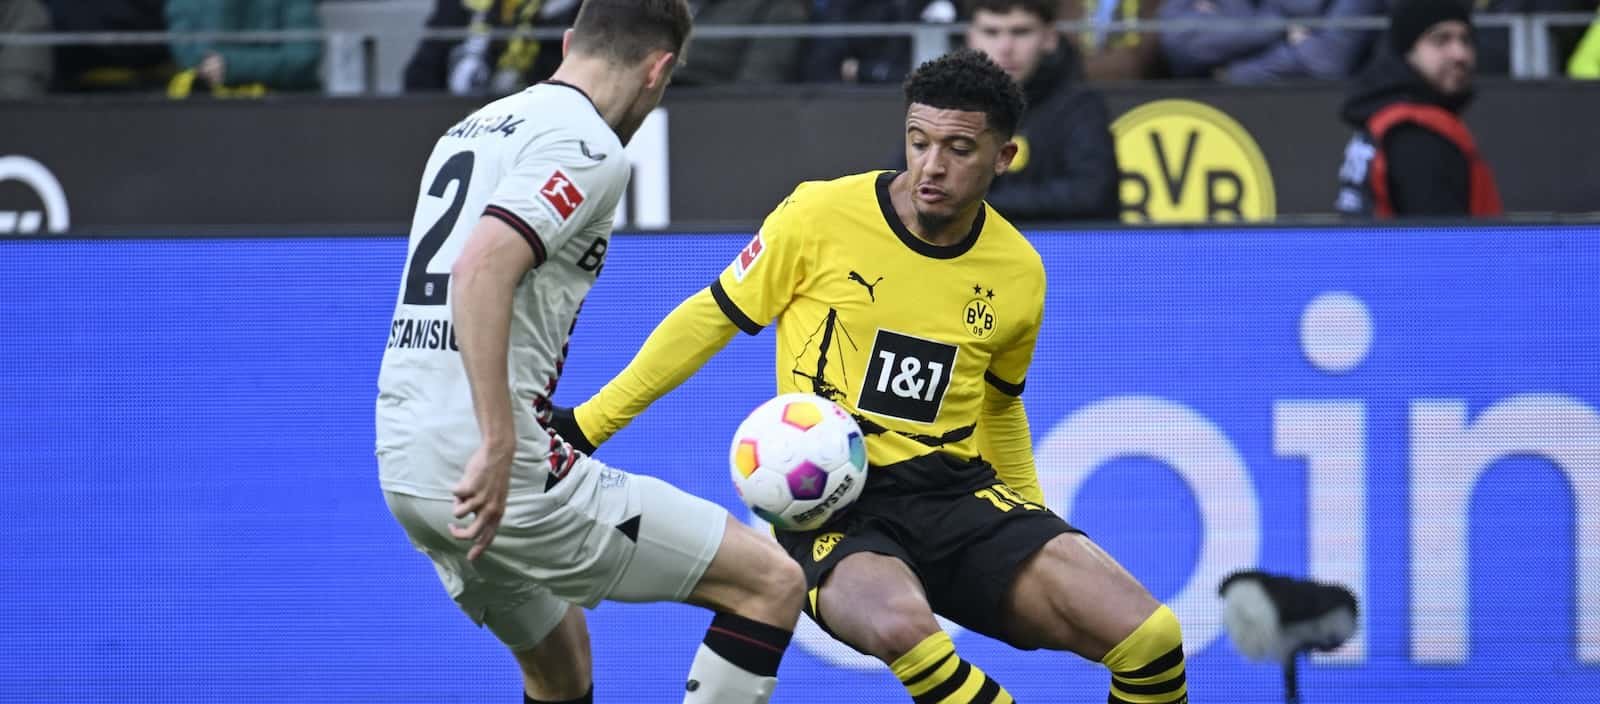 Fabrizio Romano confirms Dortmund’s chase for Jadon Sancho strengthened after Champions League qualification – Man United News And Transfer News